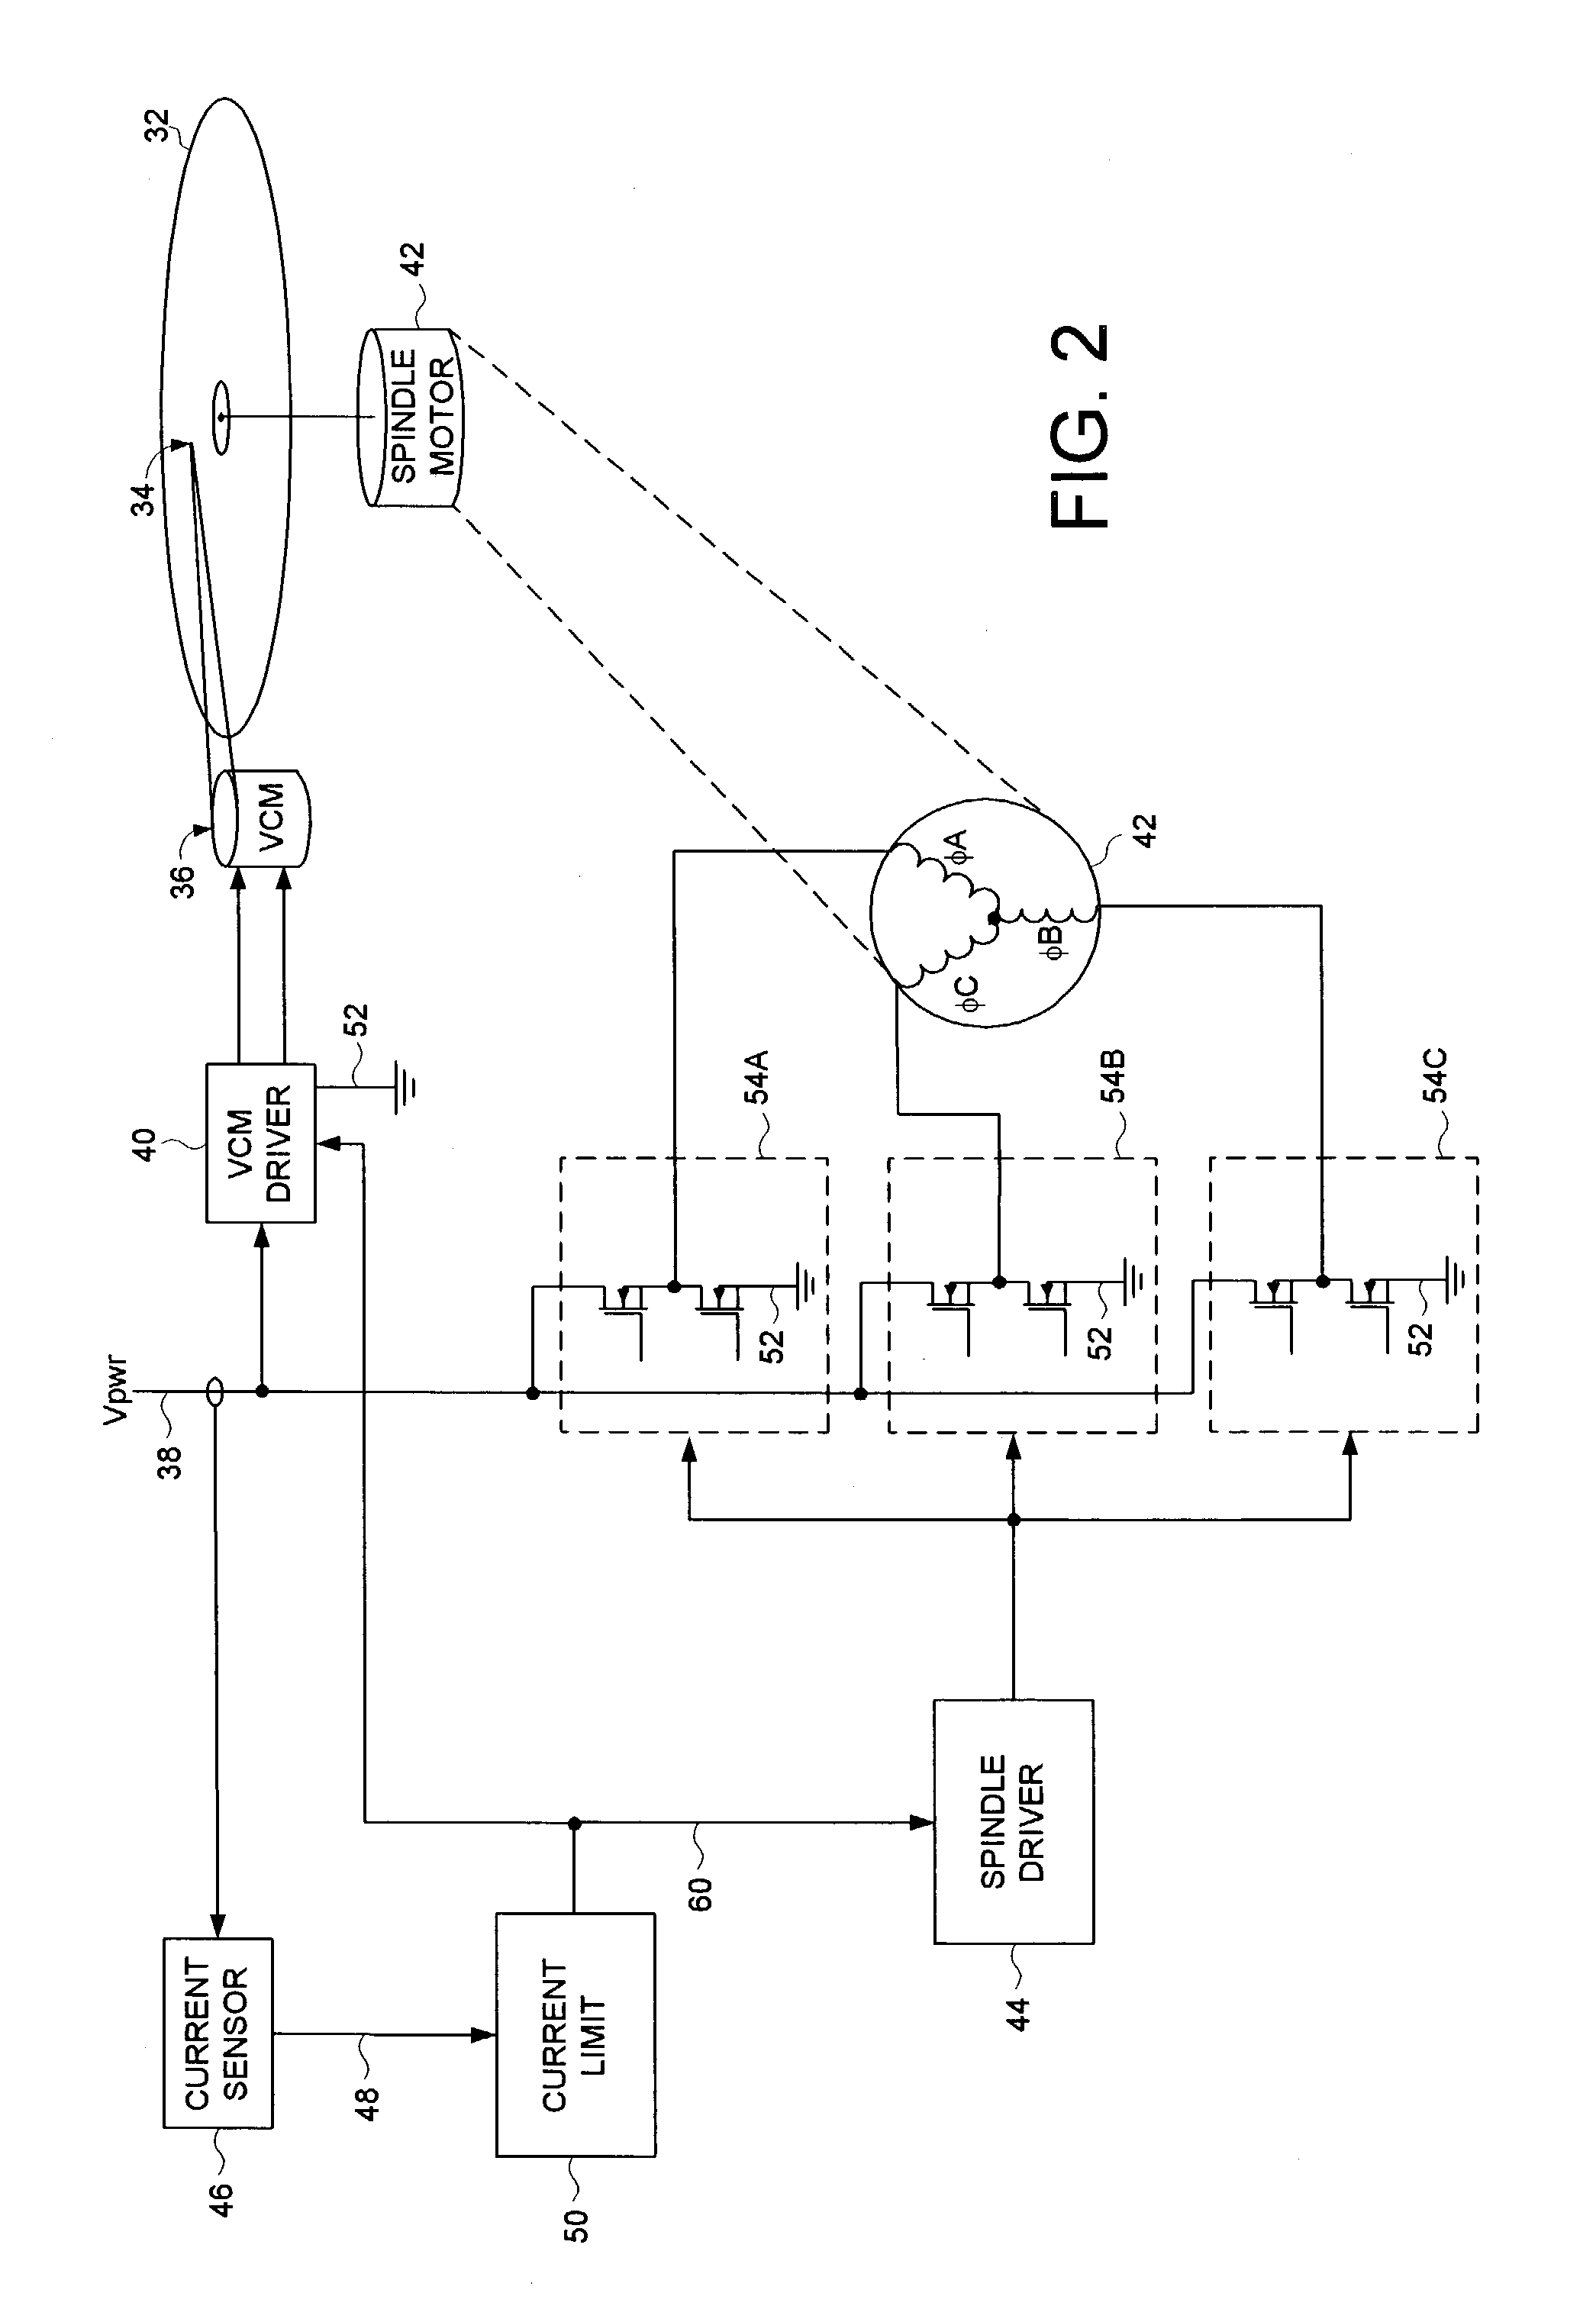 Disk drive monitoring a supply current to protect motor driver circuits